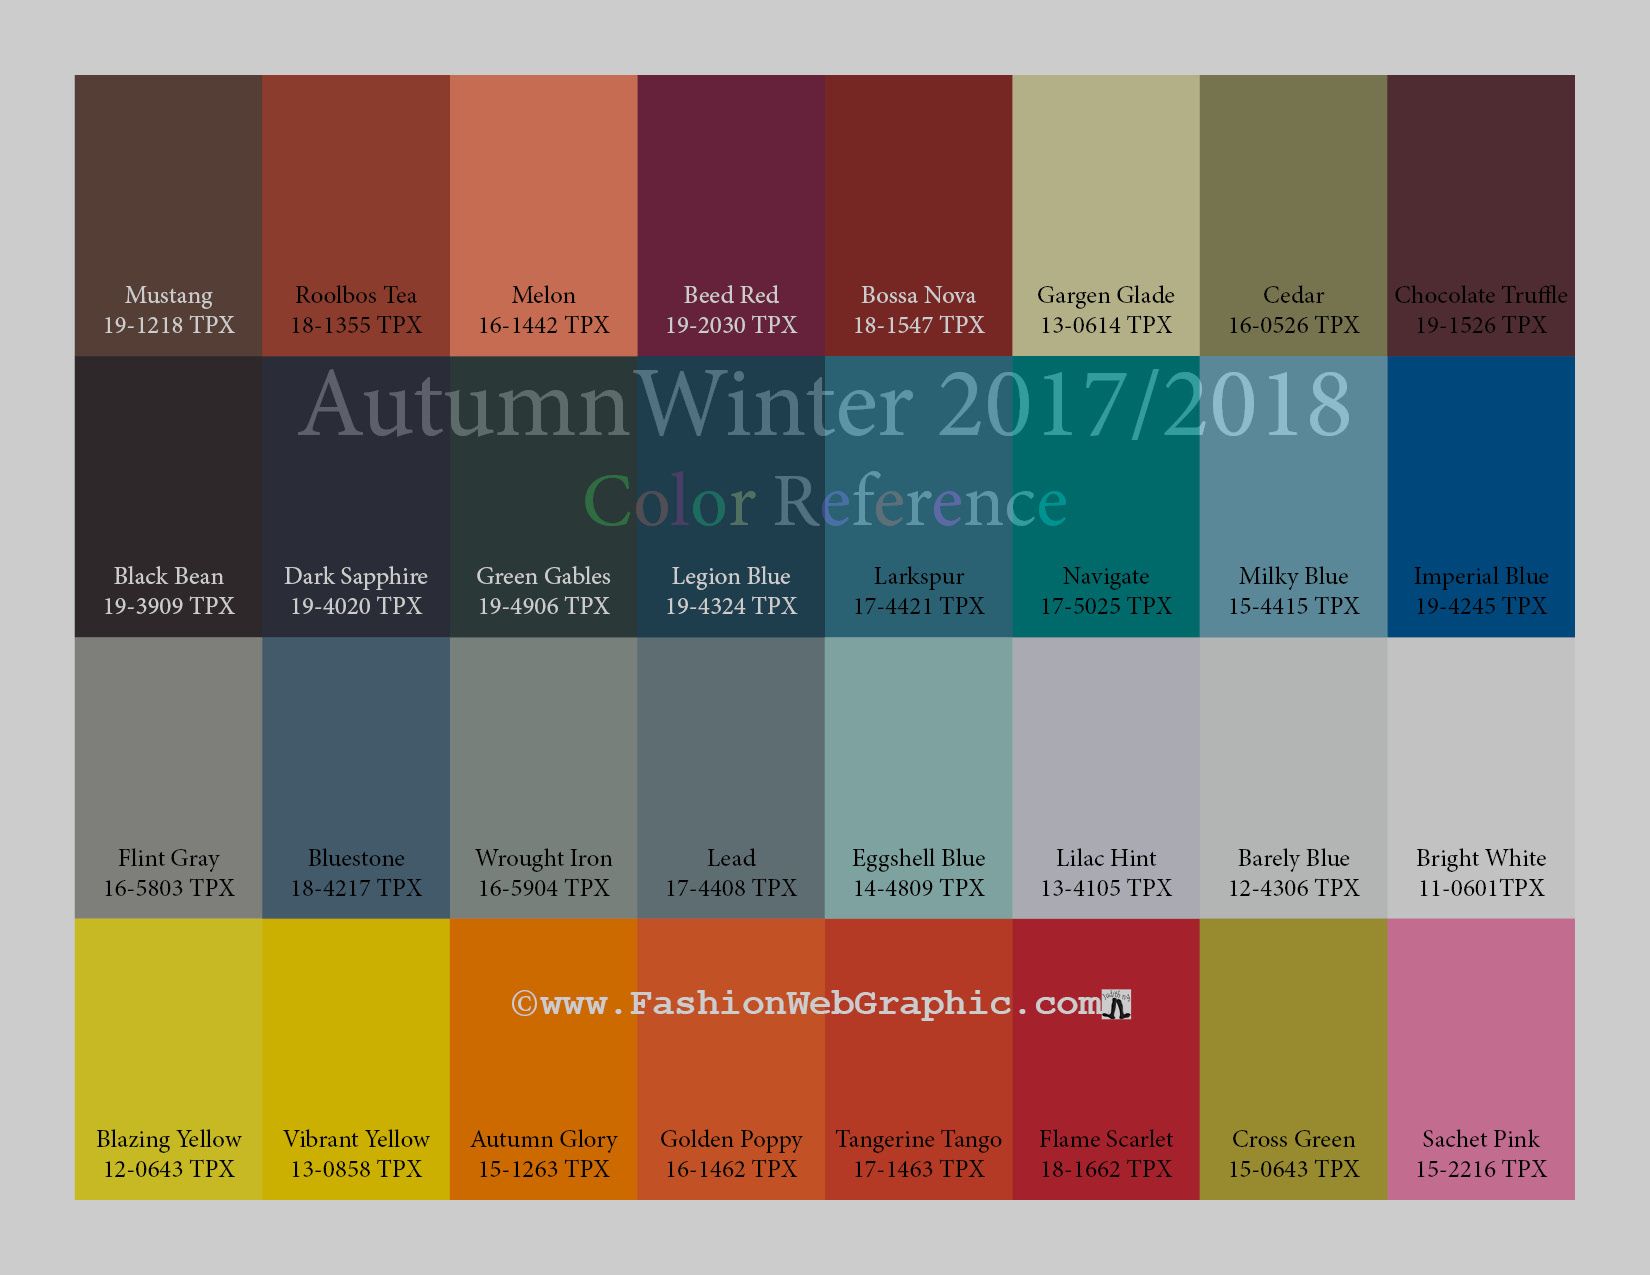 Autumn Winter 2017/2018 trend forecasting is a TREND/COLOR Guide ...